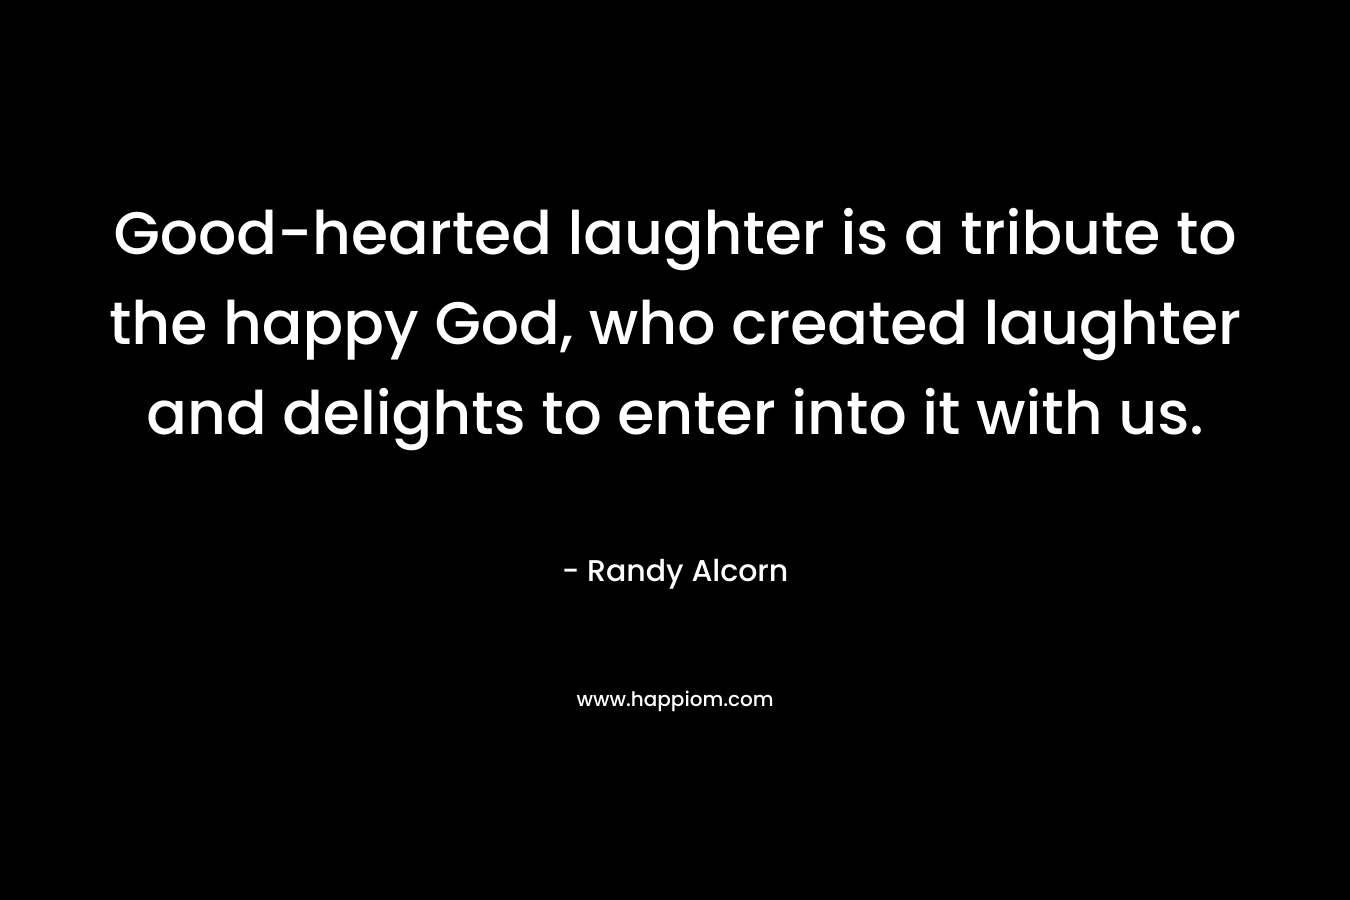 Good-hearted laughter is a tribute to the happy God, who created laughter and delights to enter into it with us. – Randy Alcorn